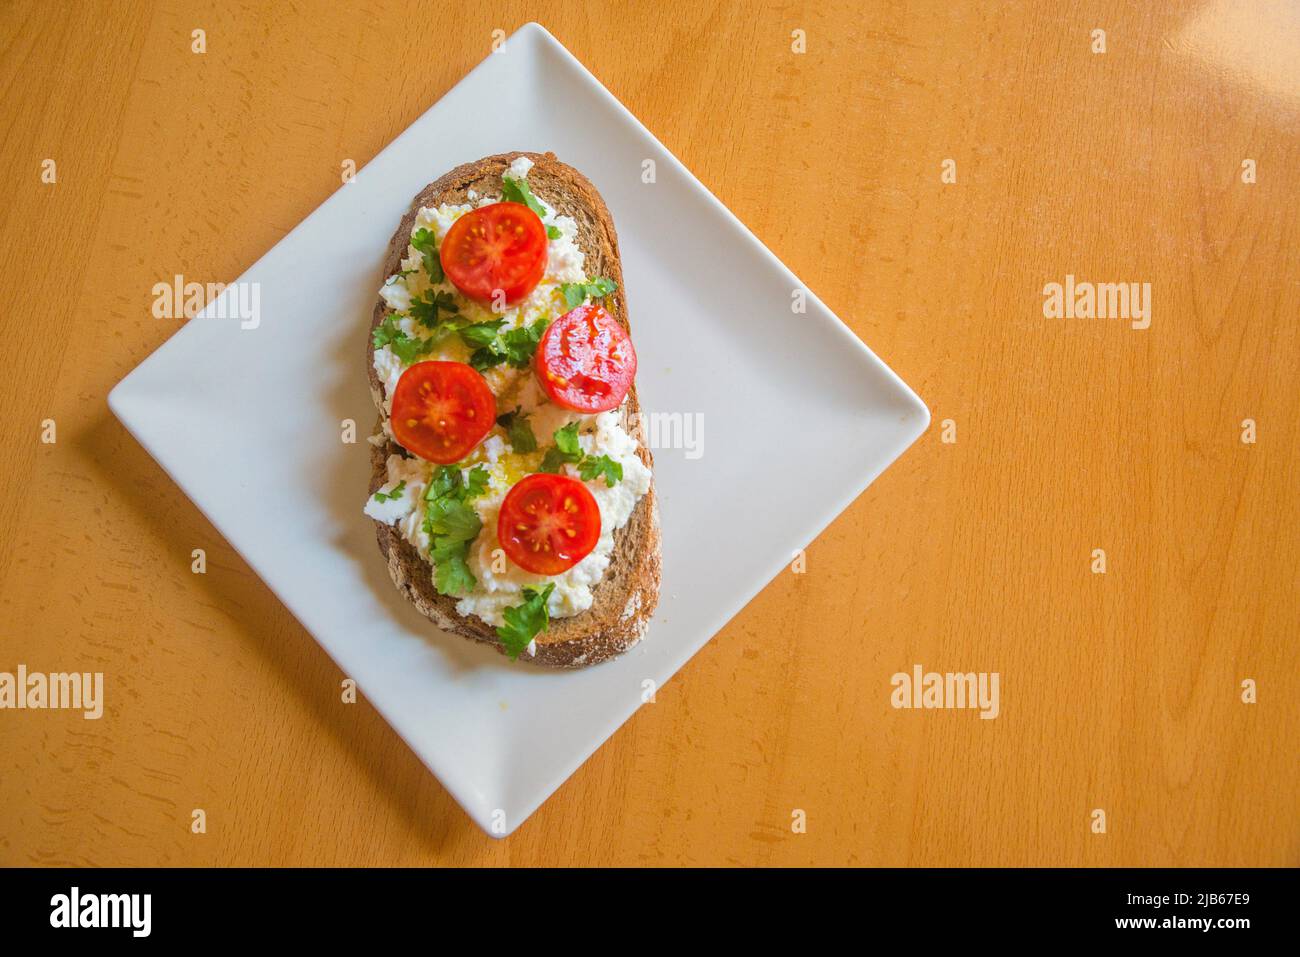 Cottage cheese with cherry tomatoes, olive oil and parsley on toast. Stock Photo